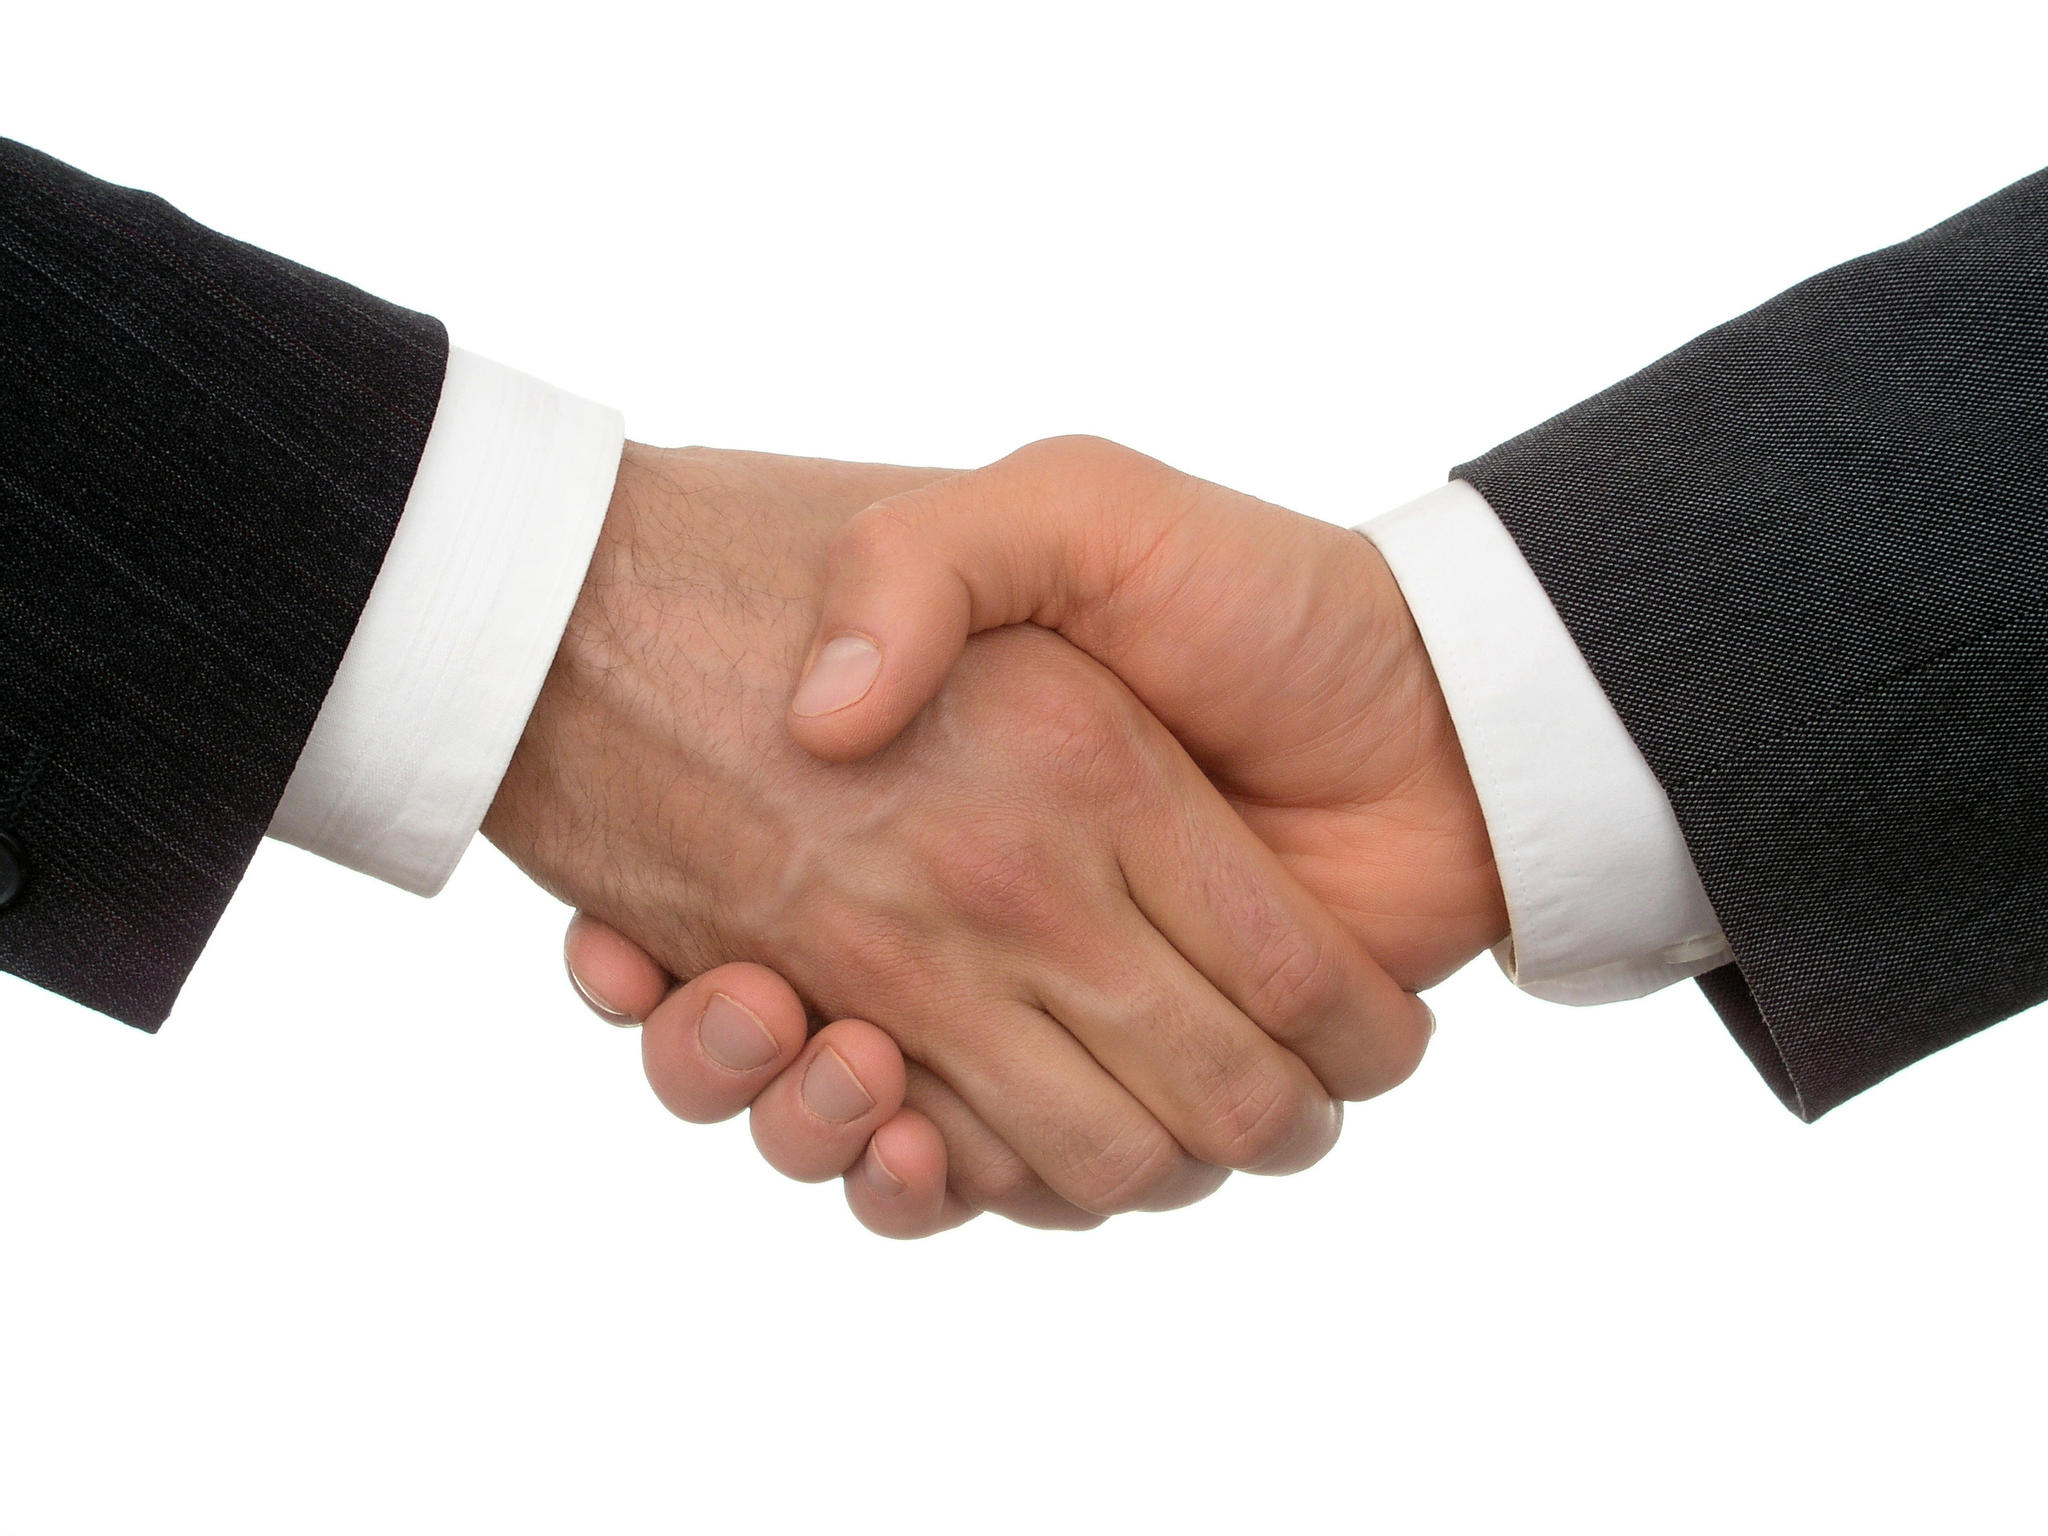 Our Handshake Is Our Contract - Handshake, Transparent background PNG HD thumbnail